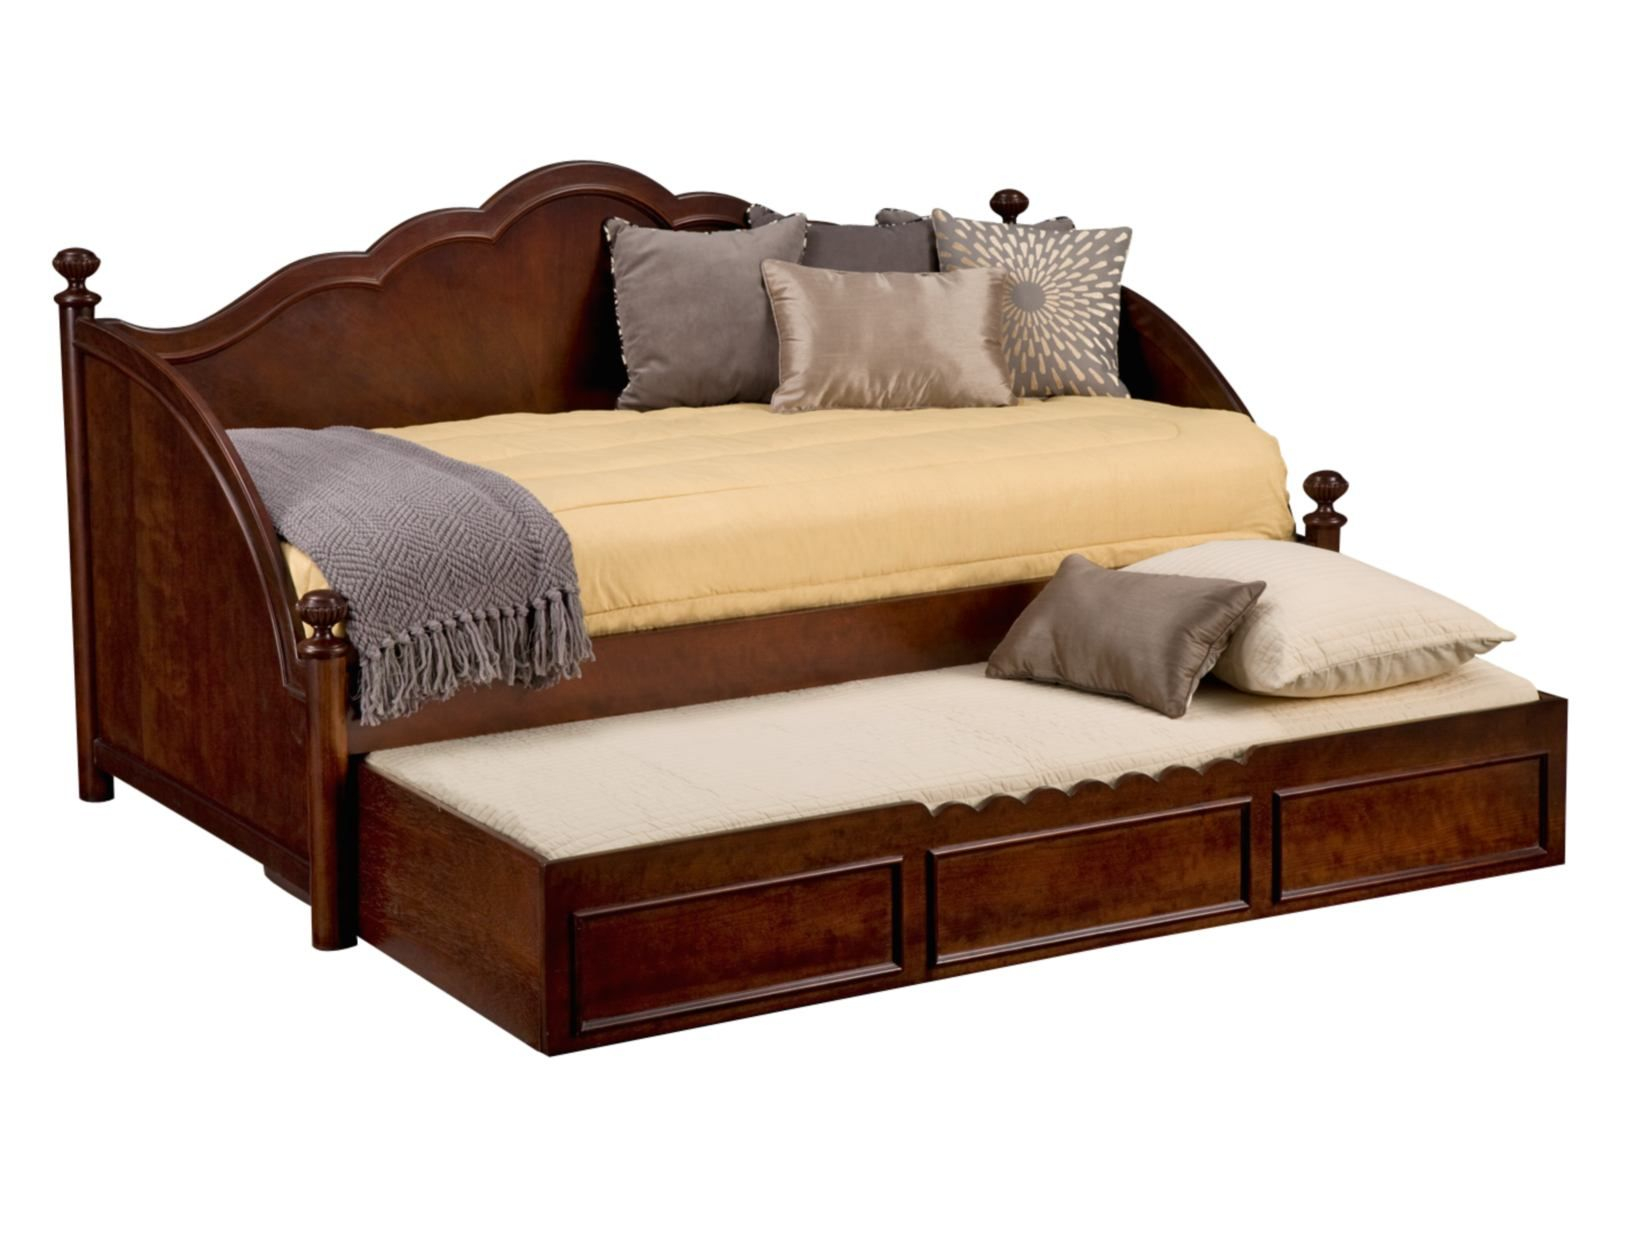 Awesome Daybed Value City Furniture Vintage With Trundle regarding proportions 1650 X 1239